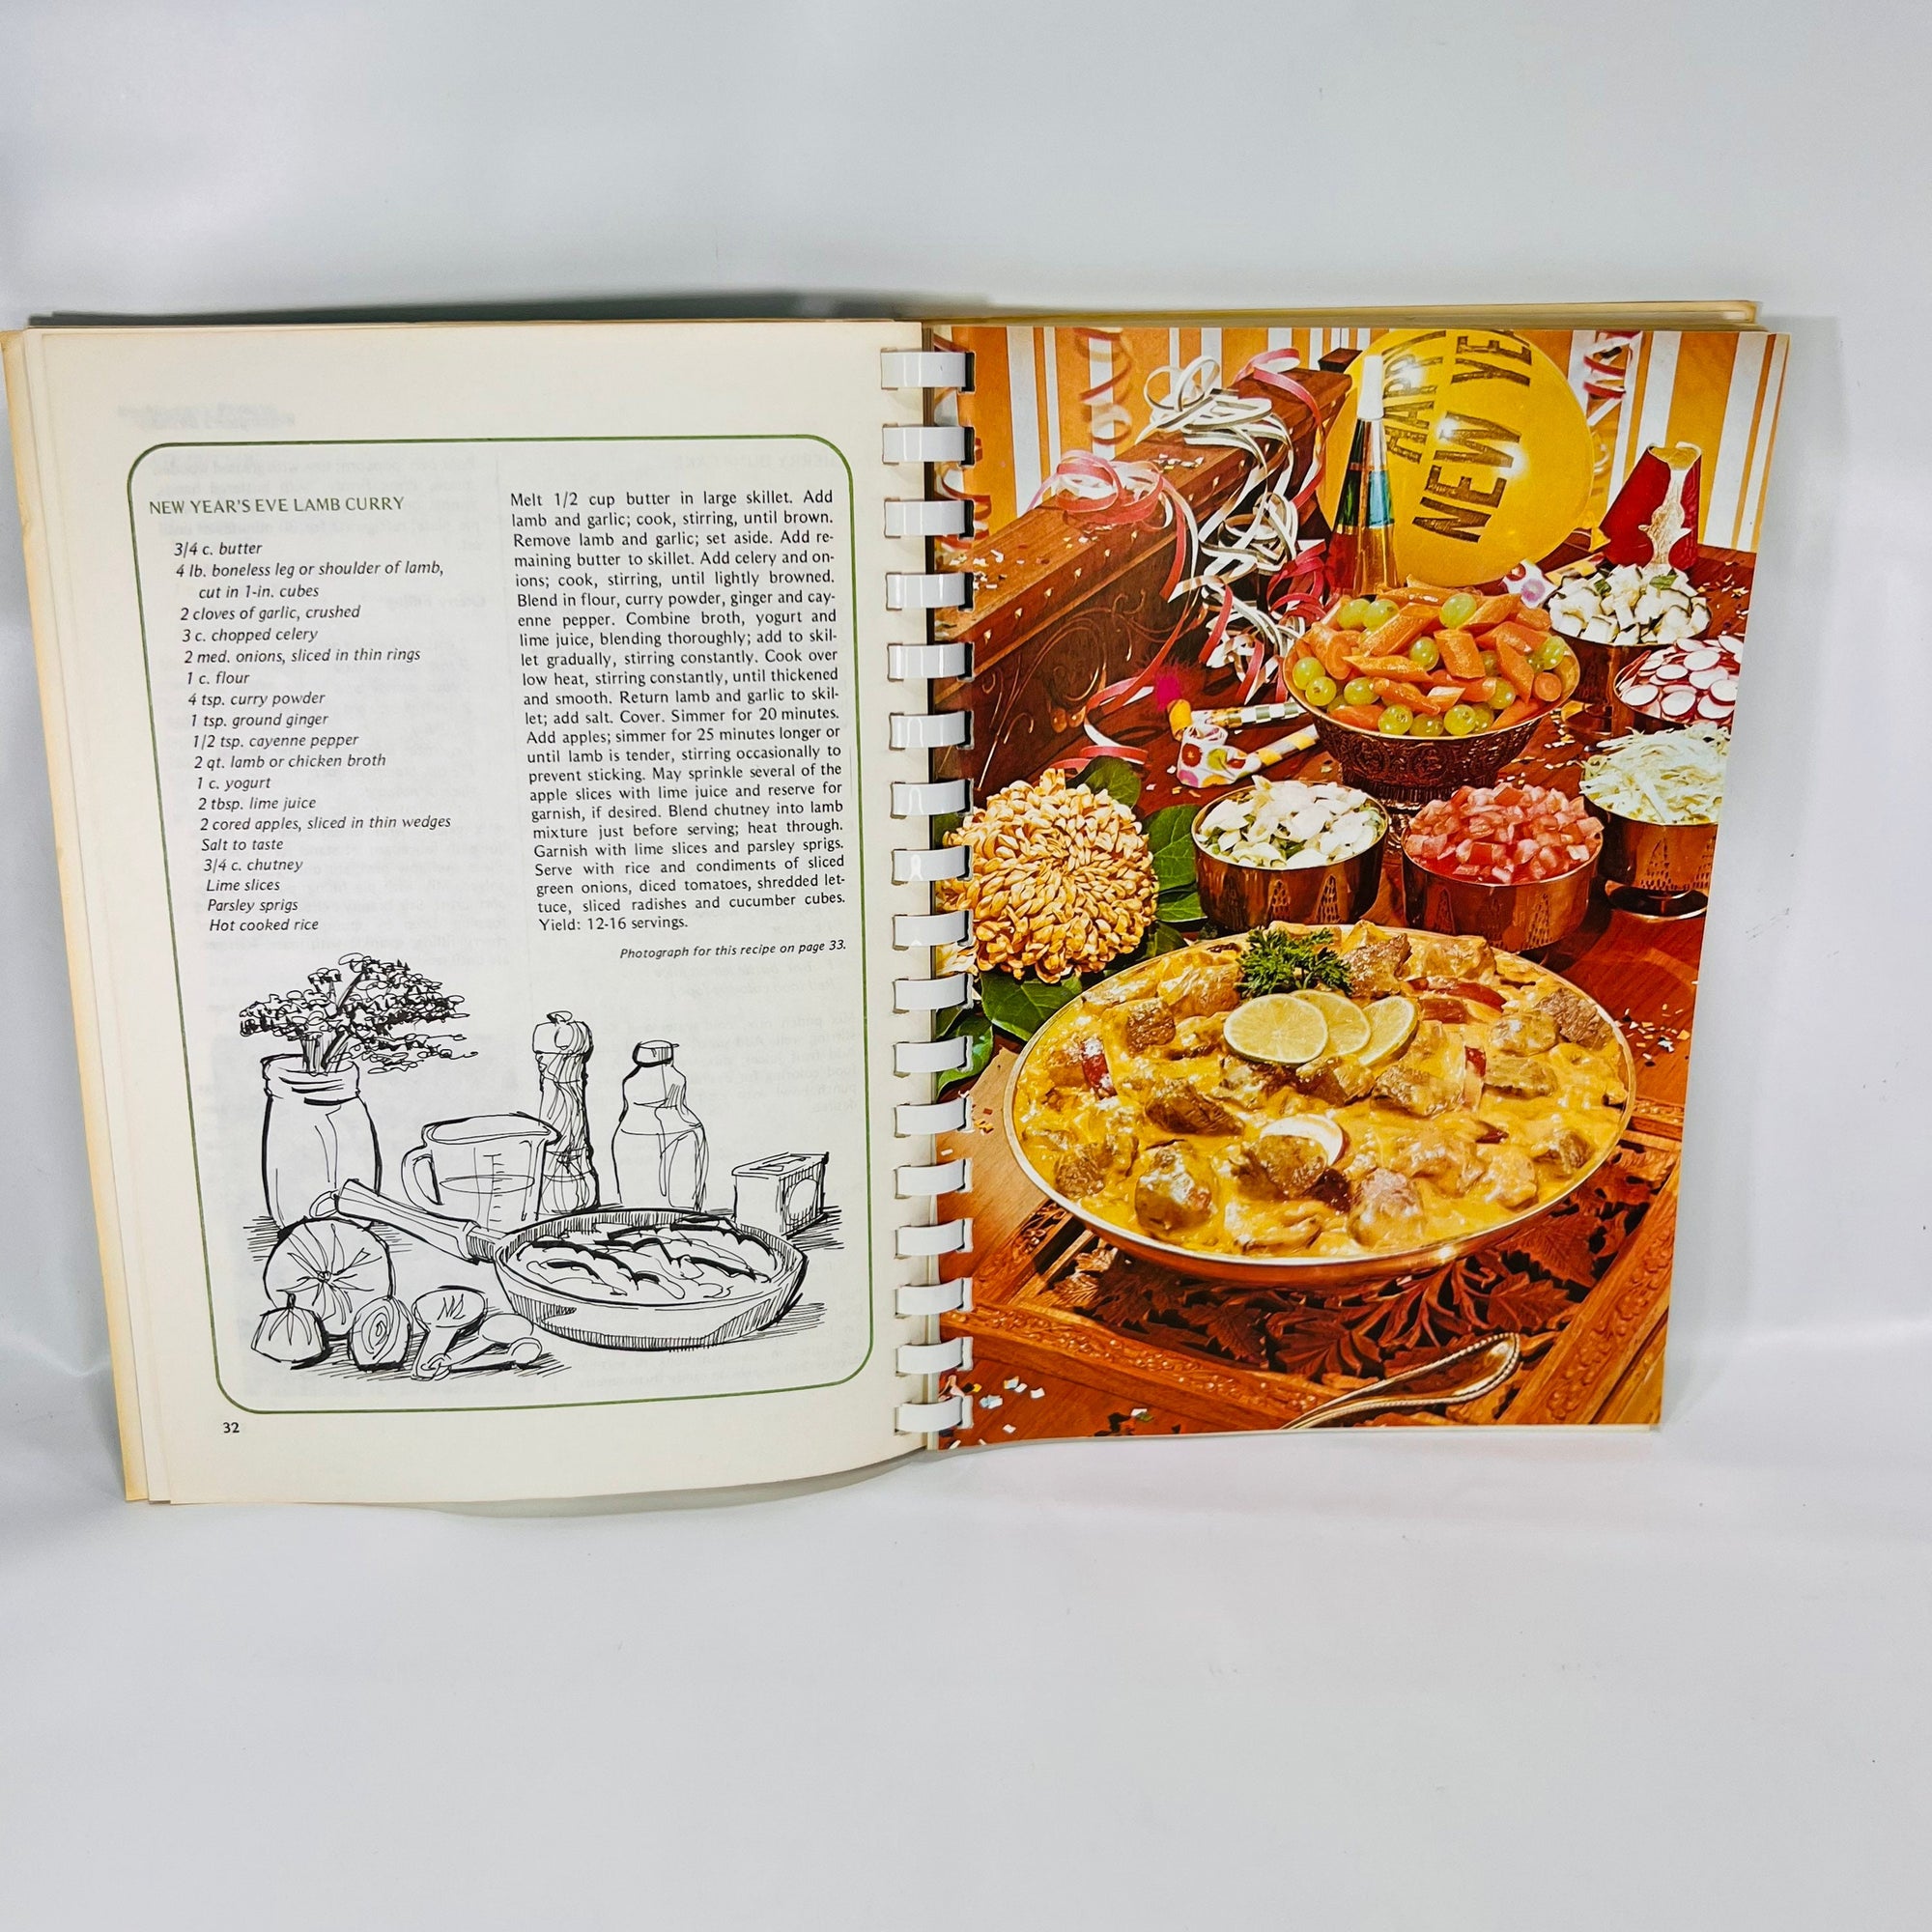 New Holiday Cookbook Favorite Recipes of America Home Economic Teachers 1974 Favorite Recipes Press Vintage Cooking Recipes Spiral Bound